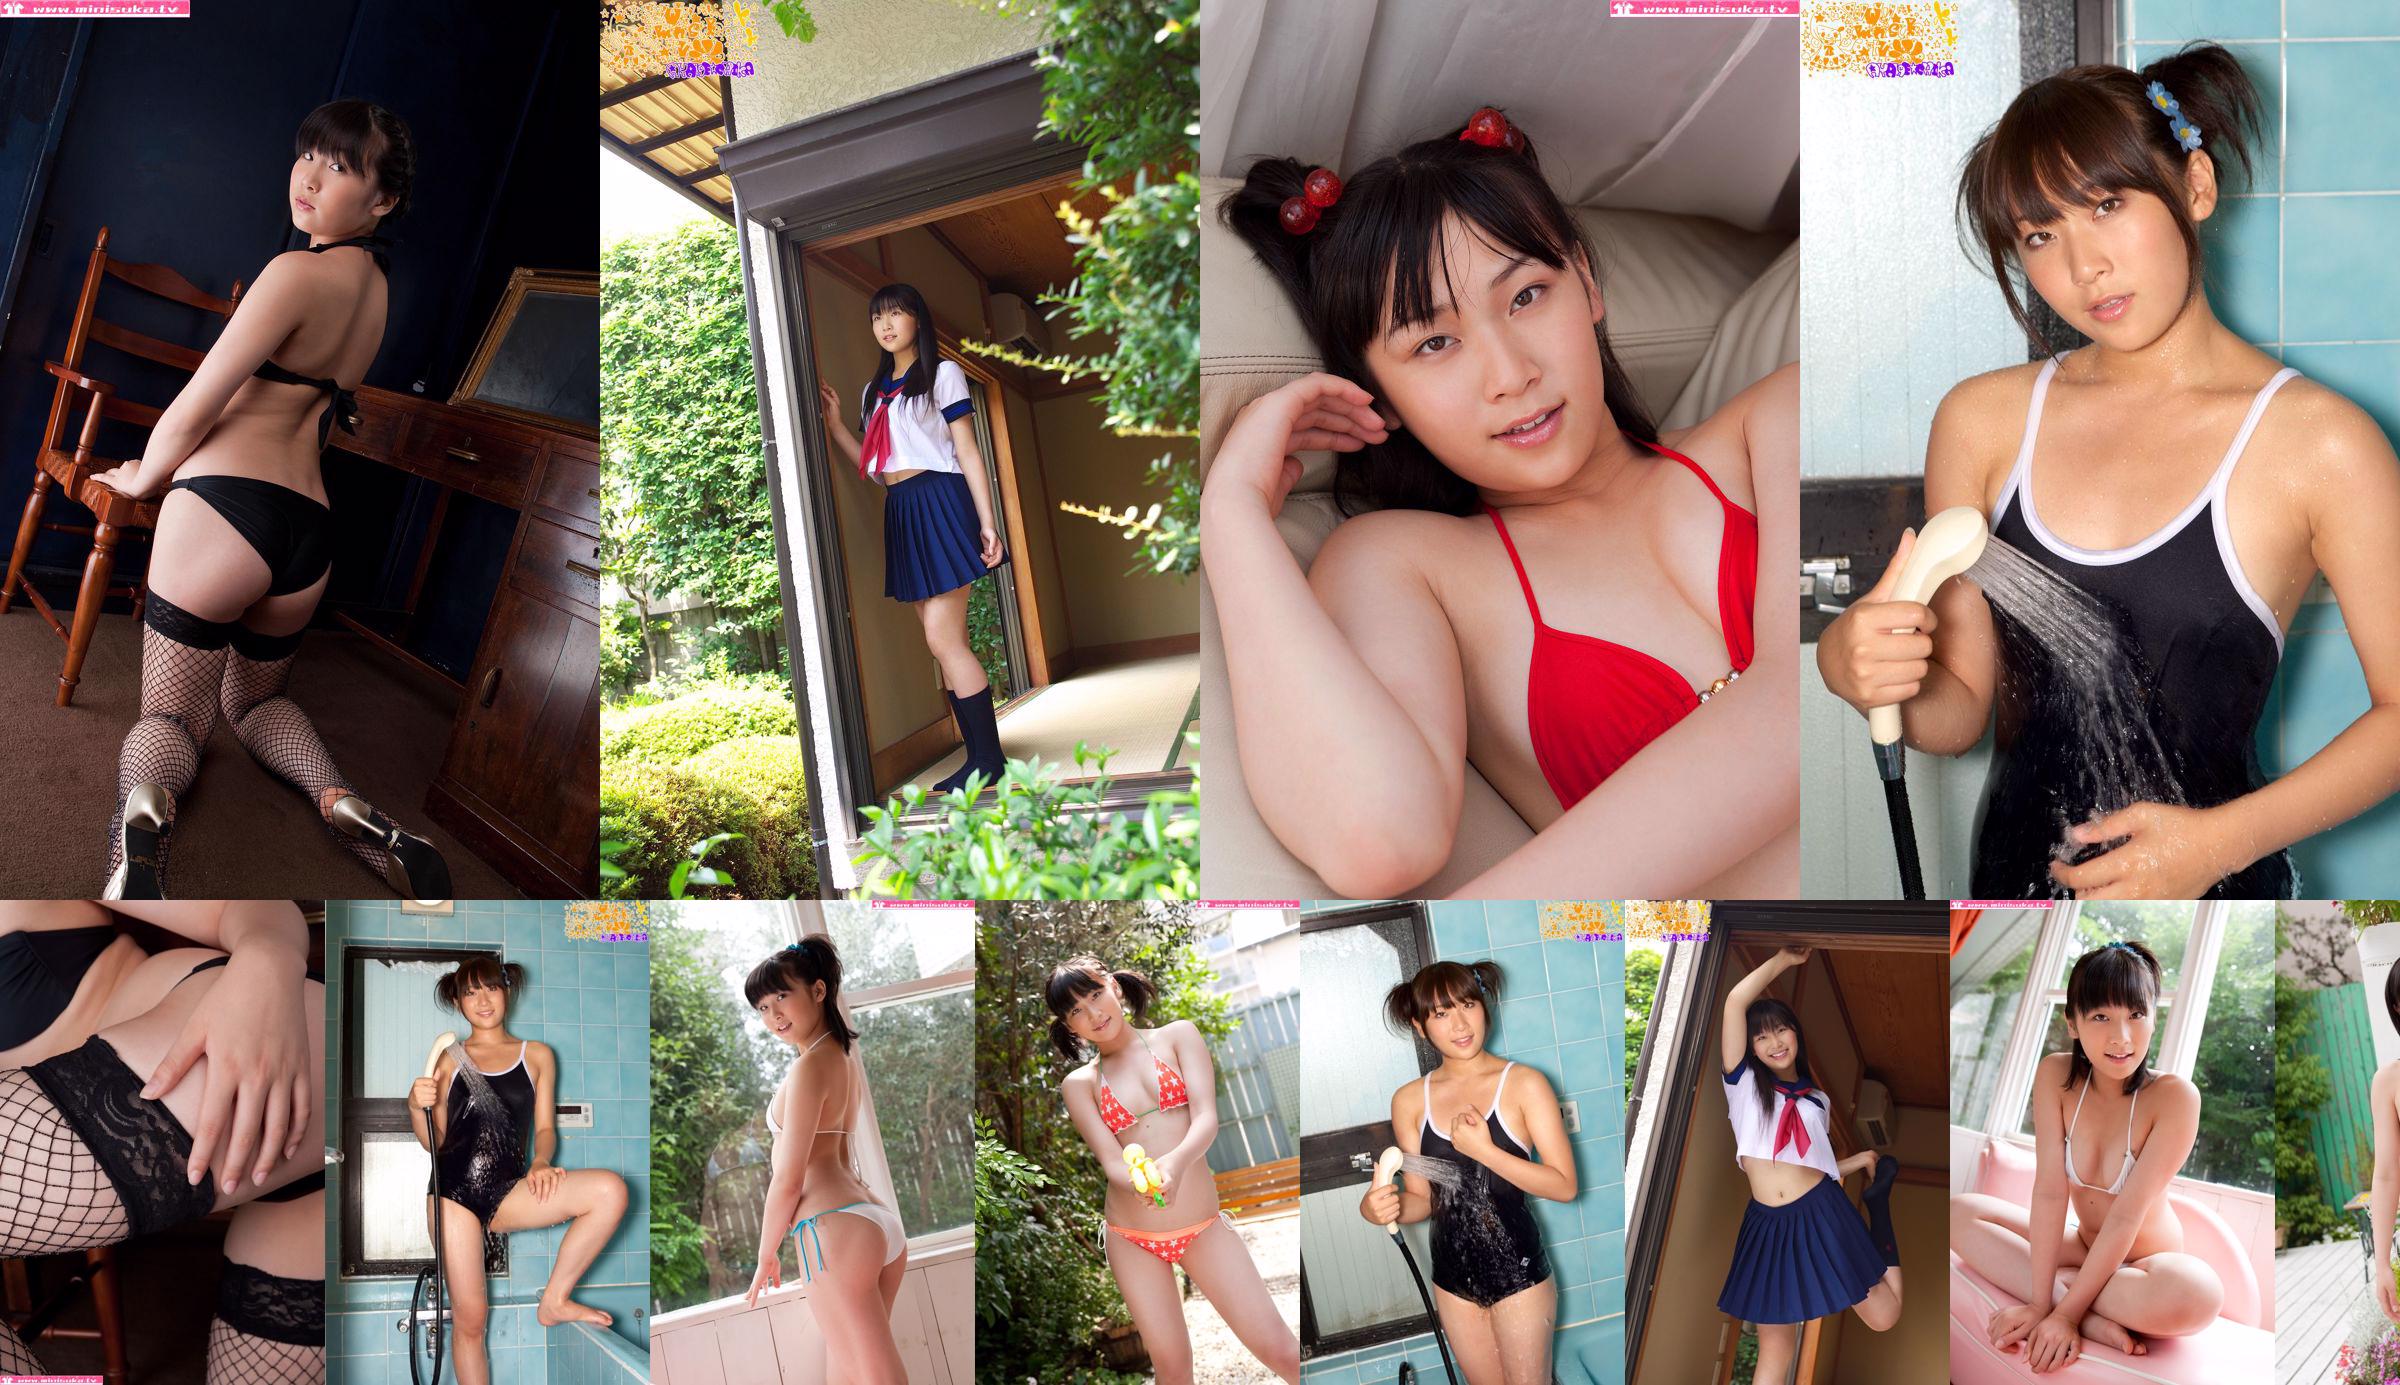 [Minisuka.tv] 彩音ちか Part 4 Stage2 Gallery Kana No.d4bbf4 Page 3